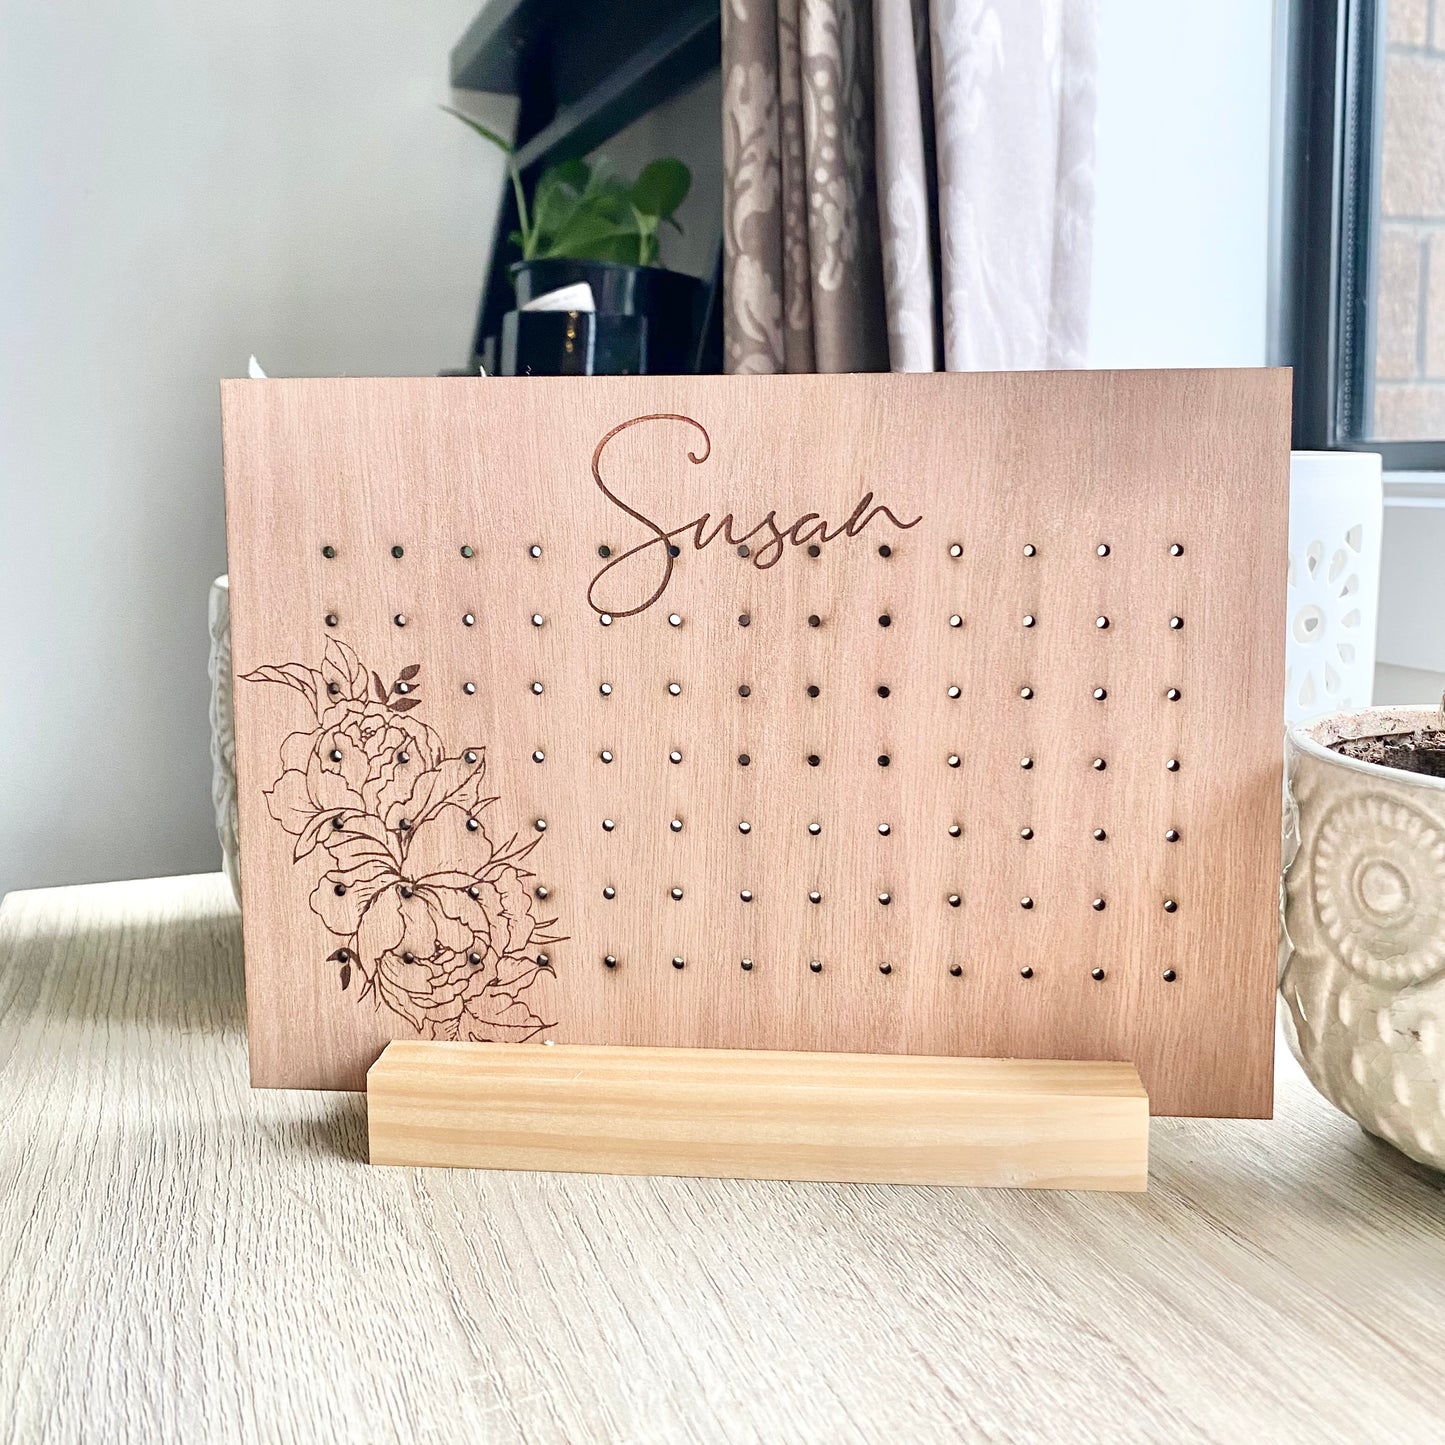 The Susan earring holder